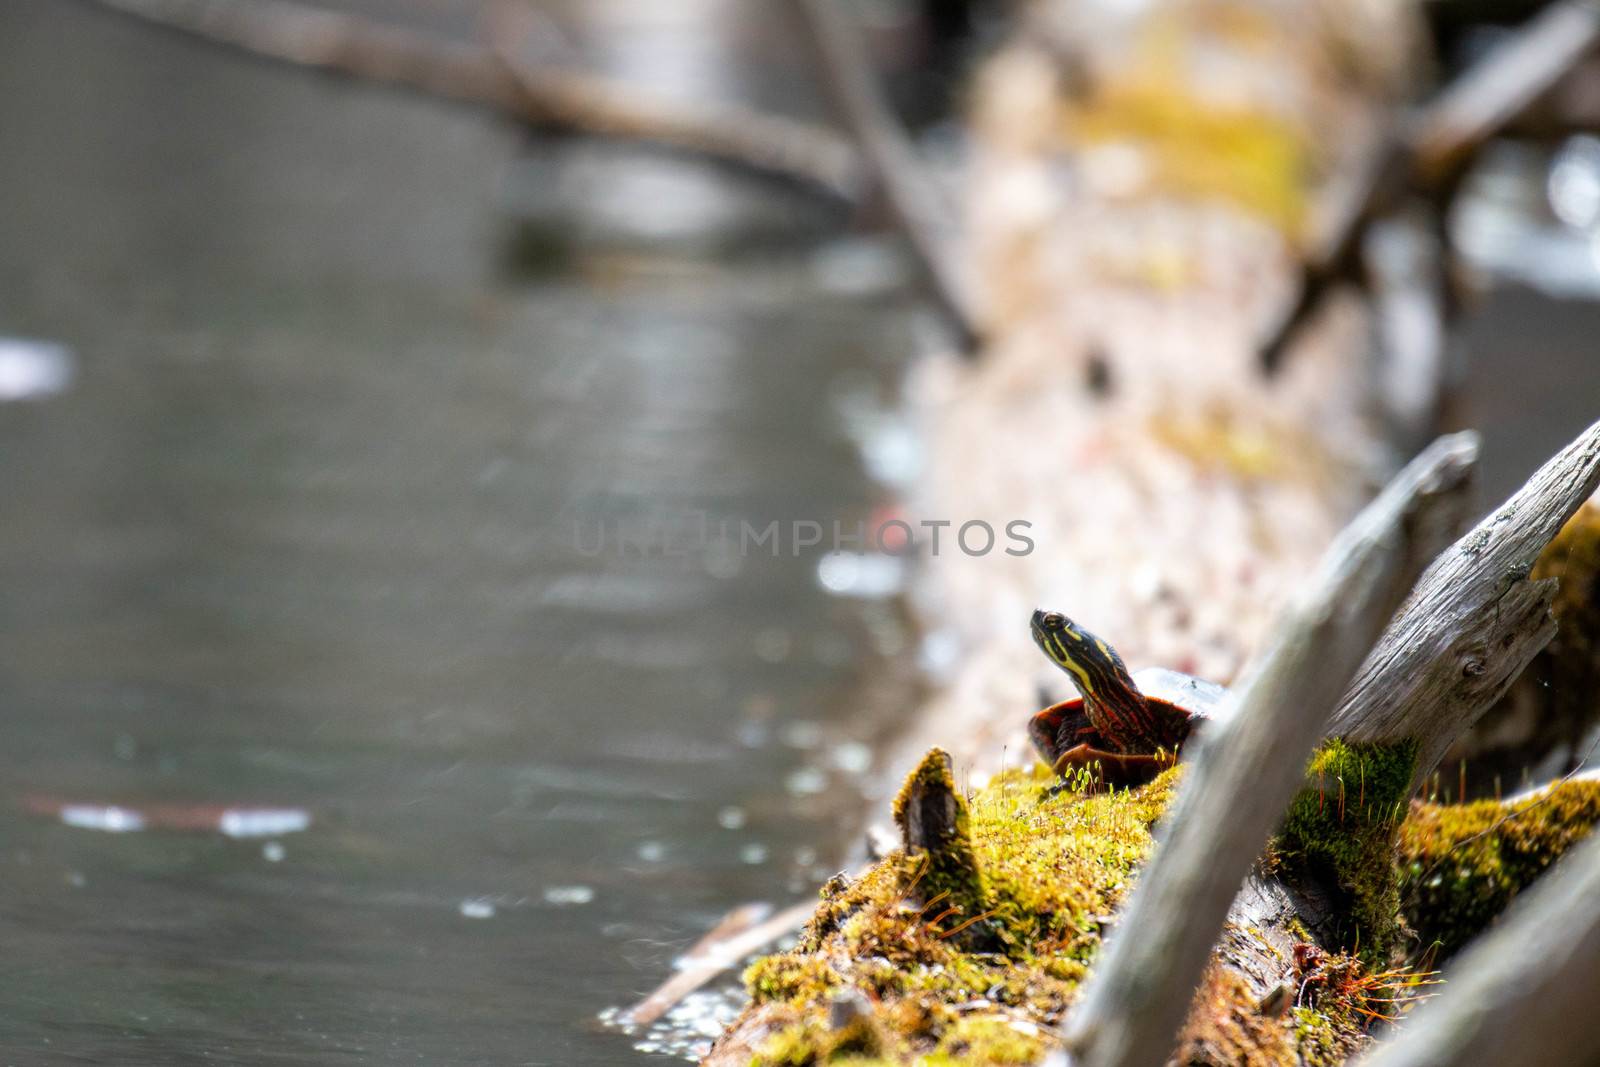 Midland Painted Turtle (Chrysemys picta marginata) Basking on a Log Surrounded by Lily Pads - Pinery Provincial Park, Ontario, Canada by mynewturtle1